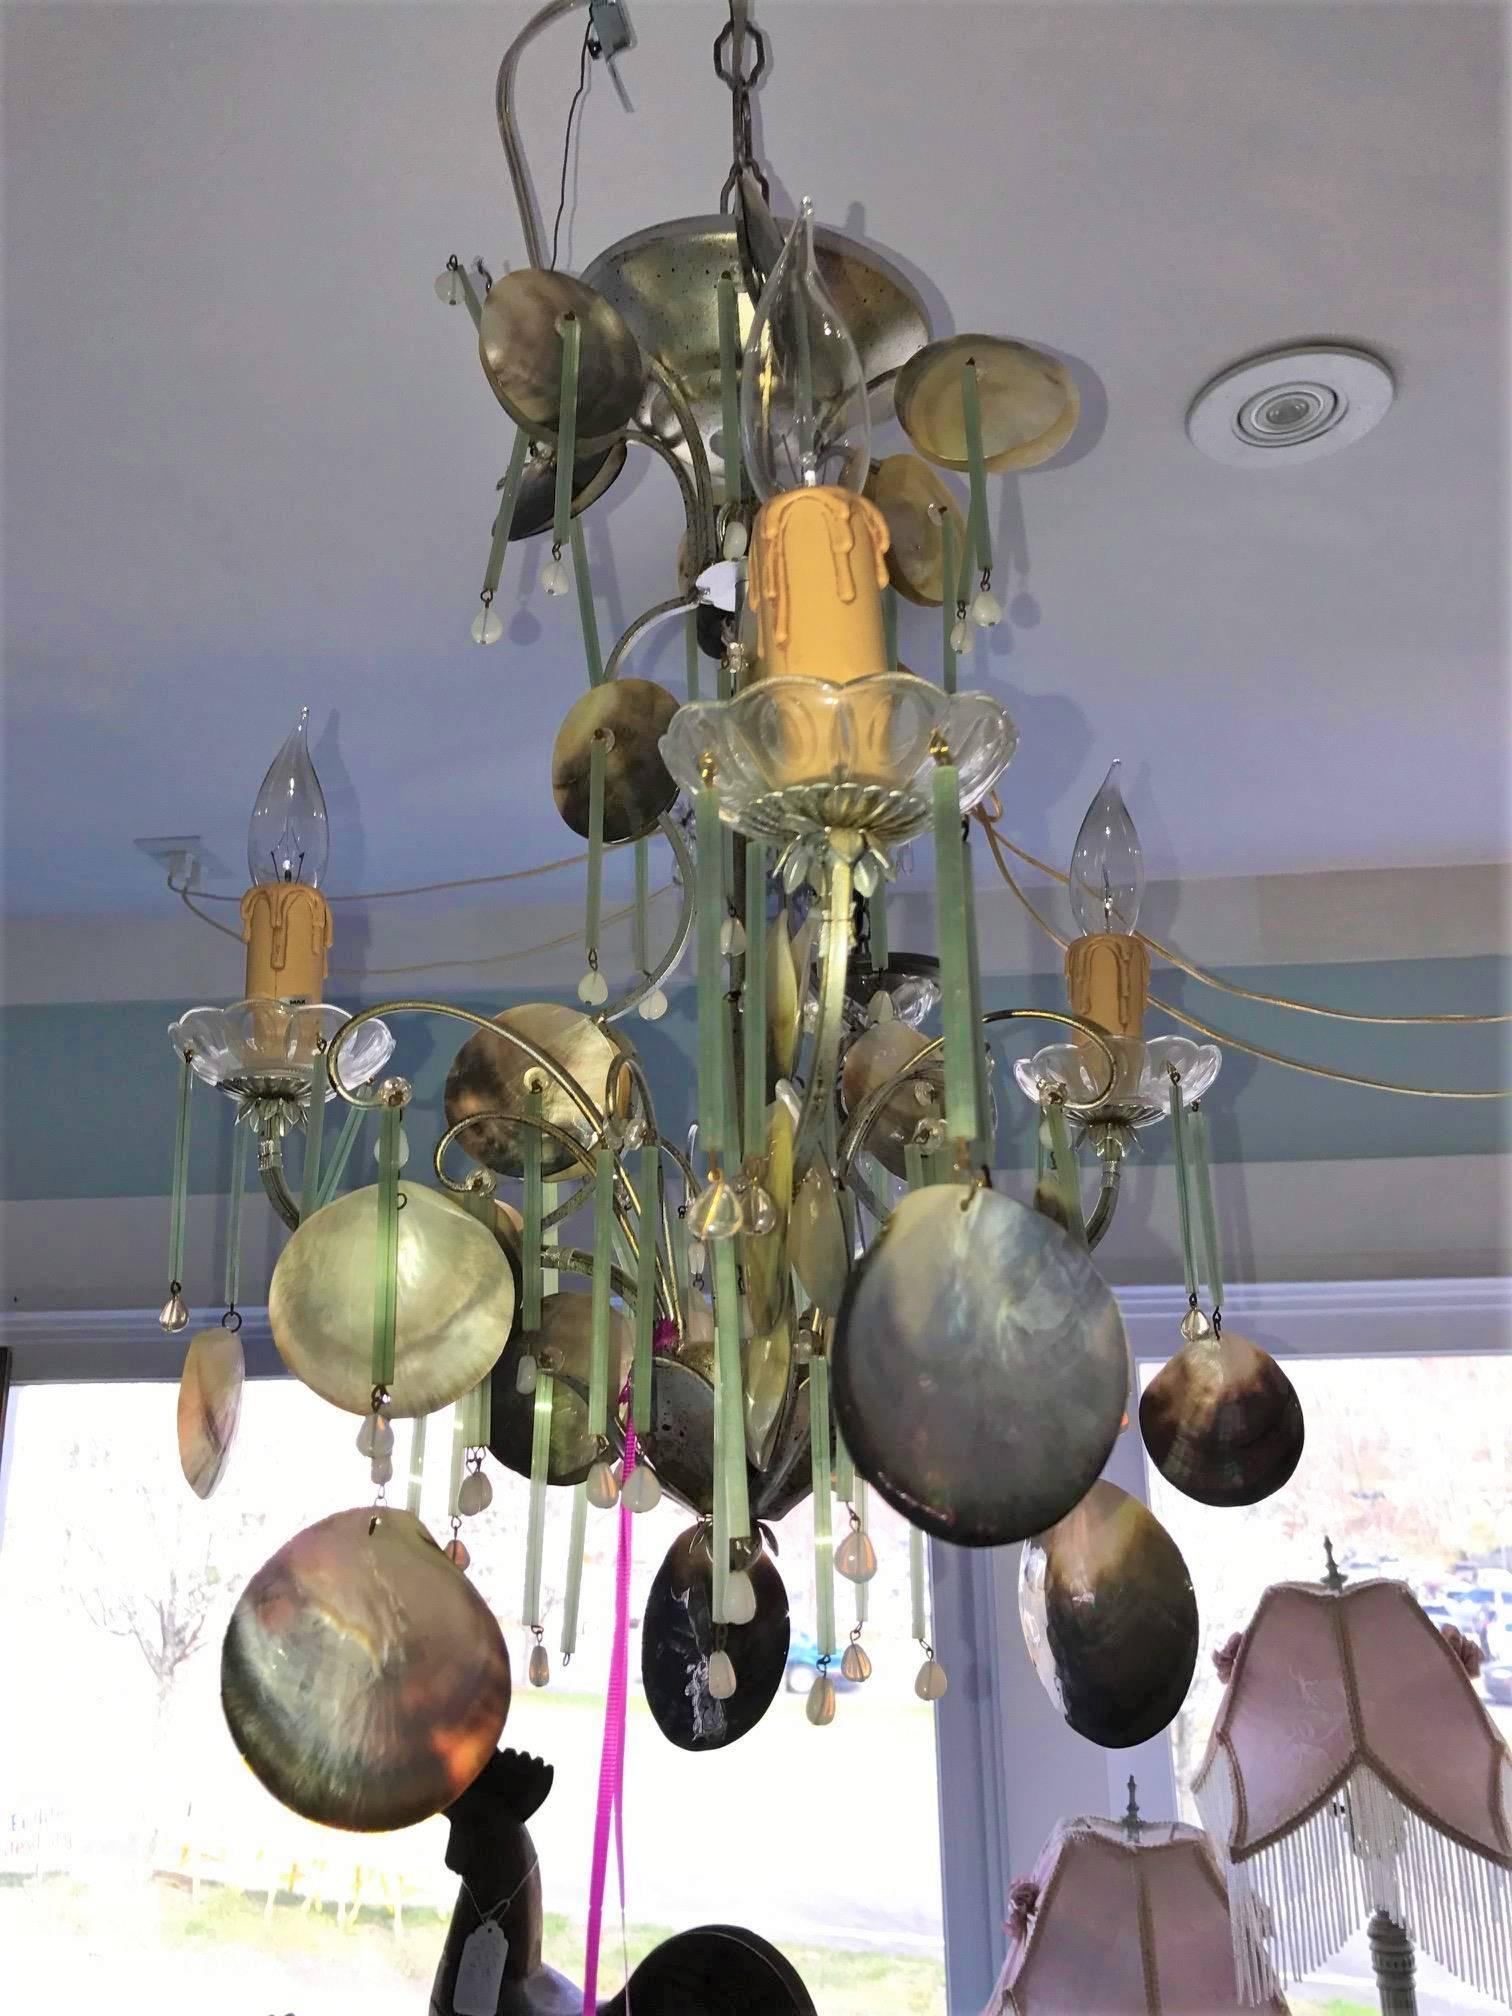 Eye-catching dazzler! Petite antiqued coastal cottage chandelier great sea shell ornaments and Murano crystals. Fabulous mix of diversified seashell's from around the globe. Sage crystal's add a soft glimmer to this petite estate piece.

A larger